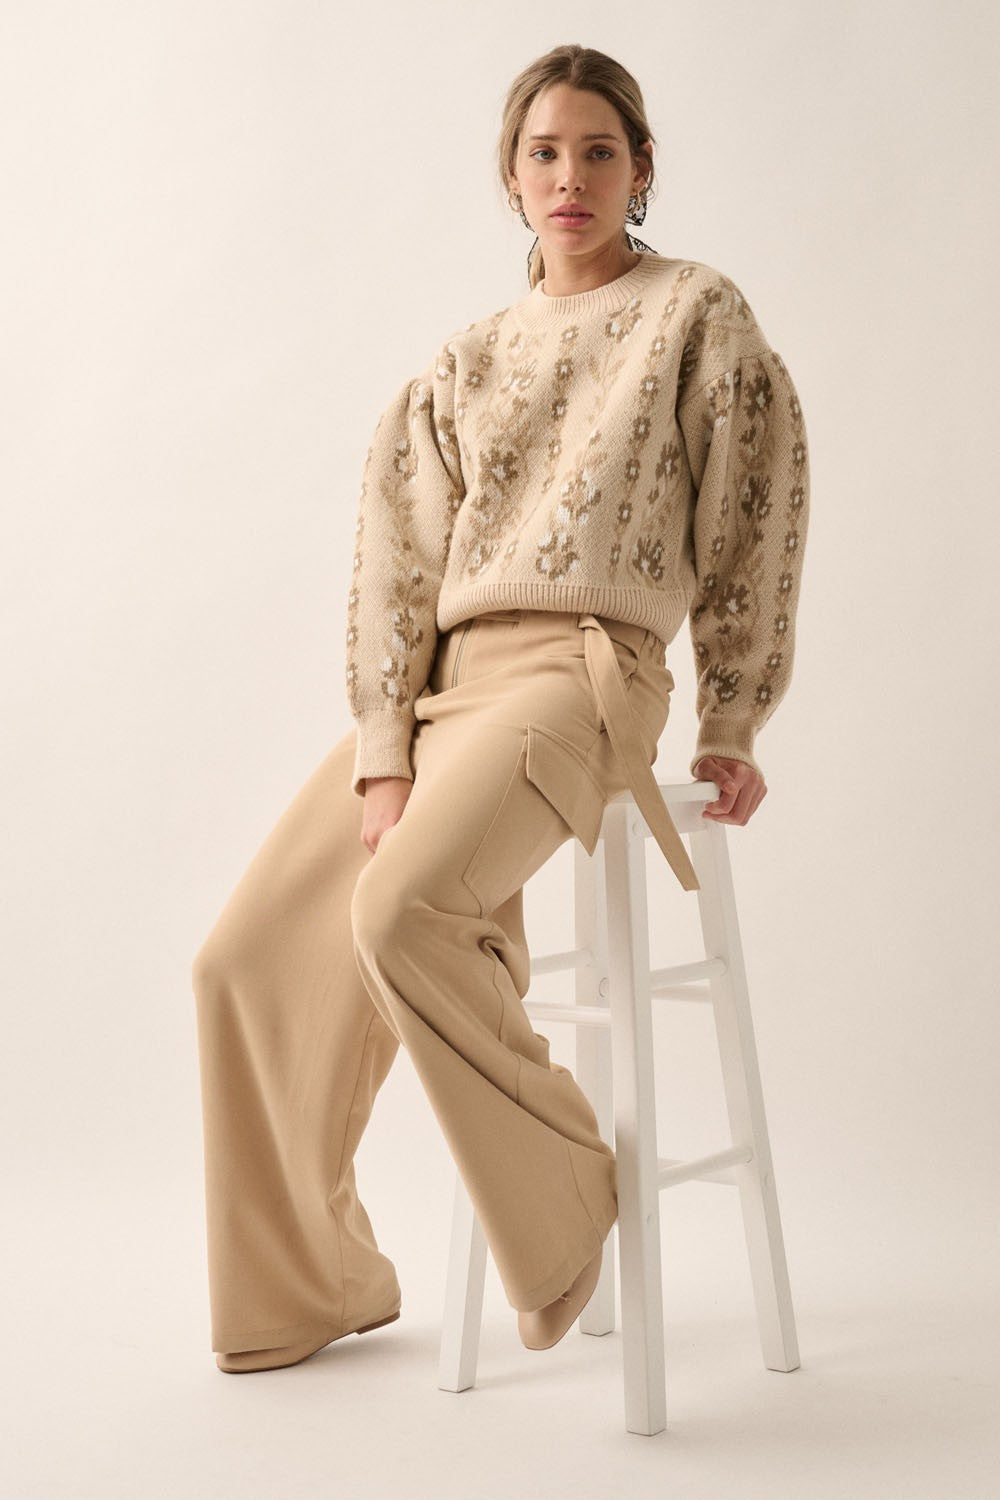 Floral-Daydream-Long-Sleeve-Knit-Sweater-Cream-Beige-Avah